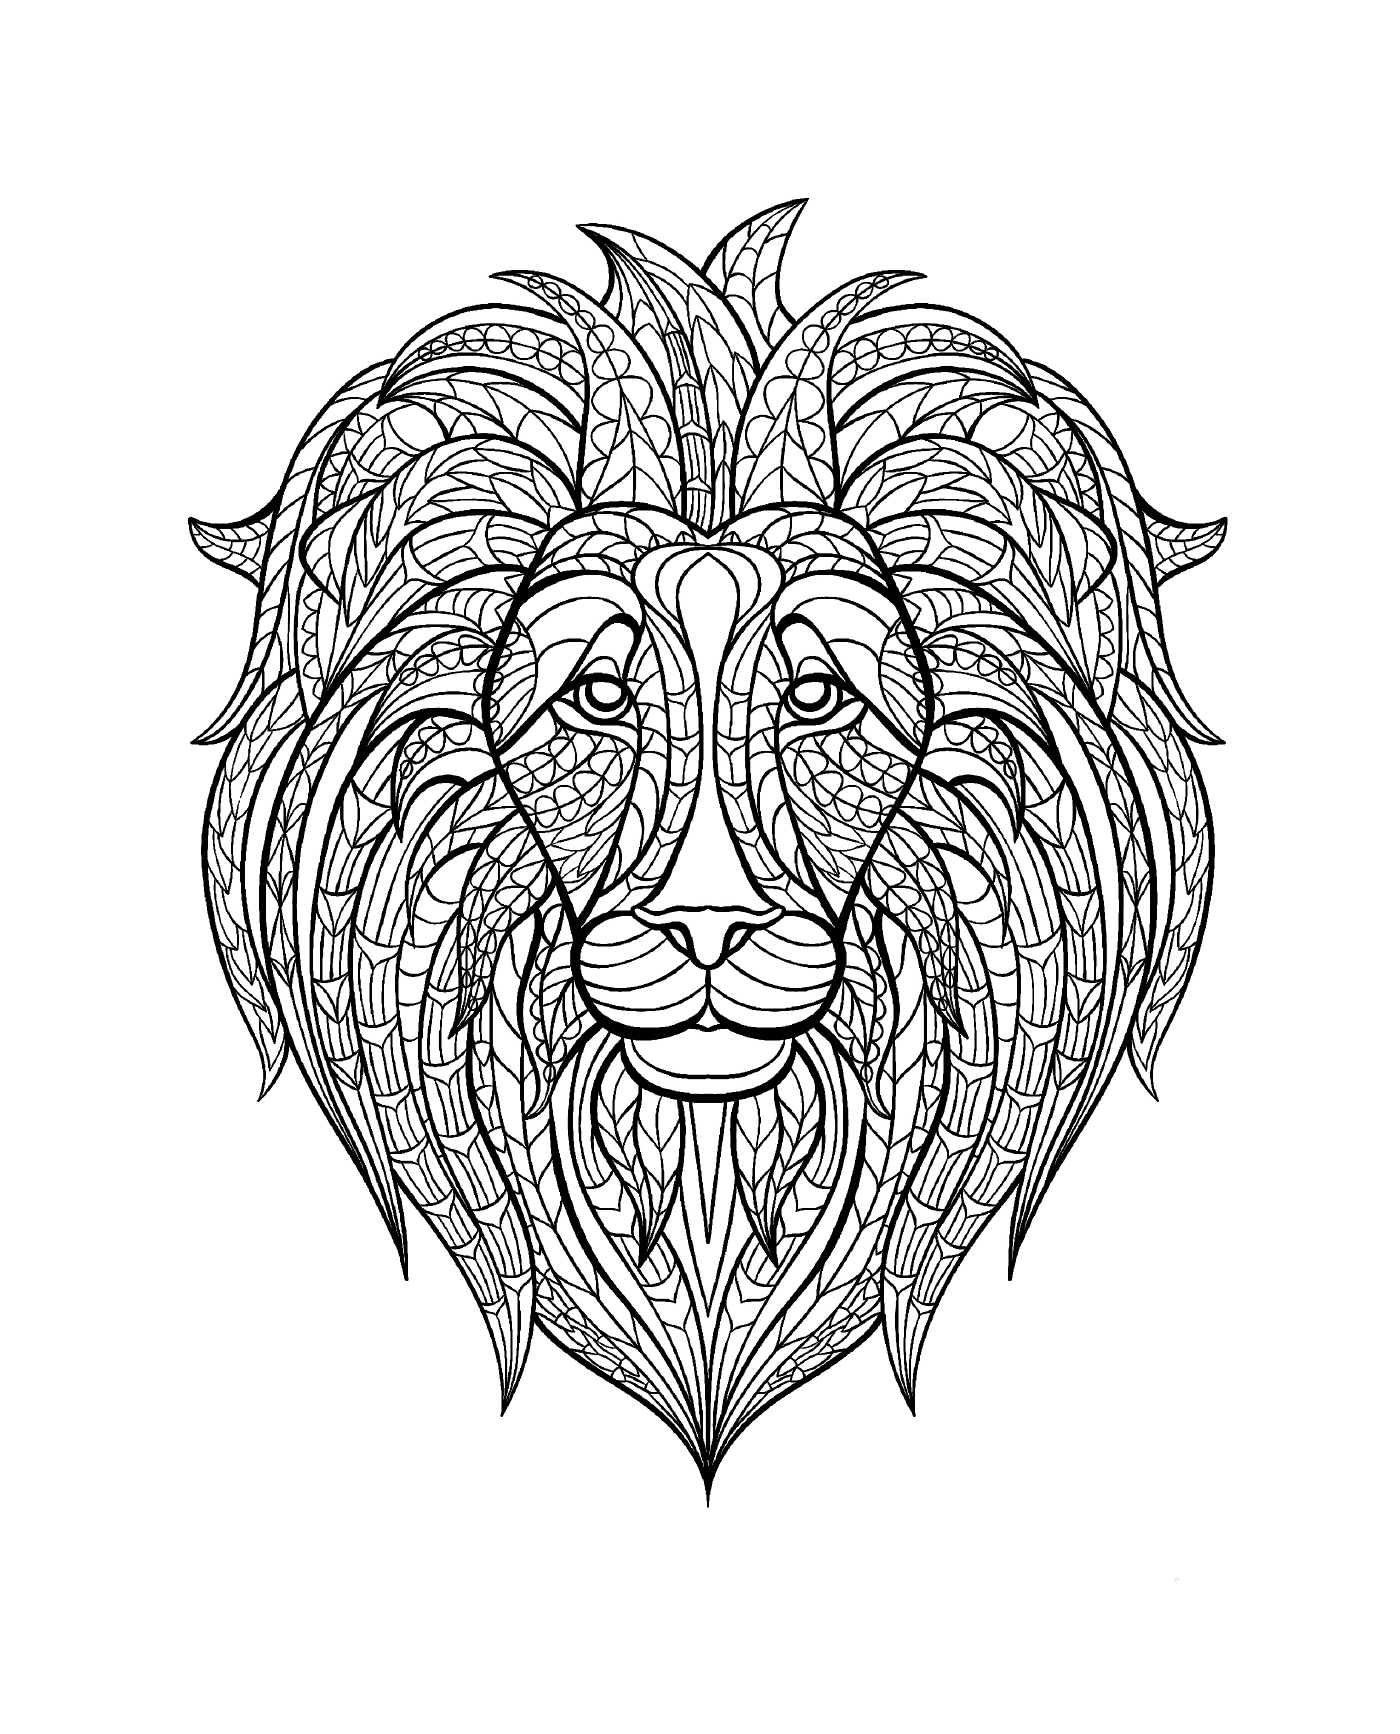  Lion's head with a pattern on the face 